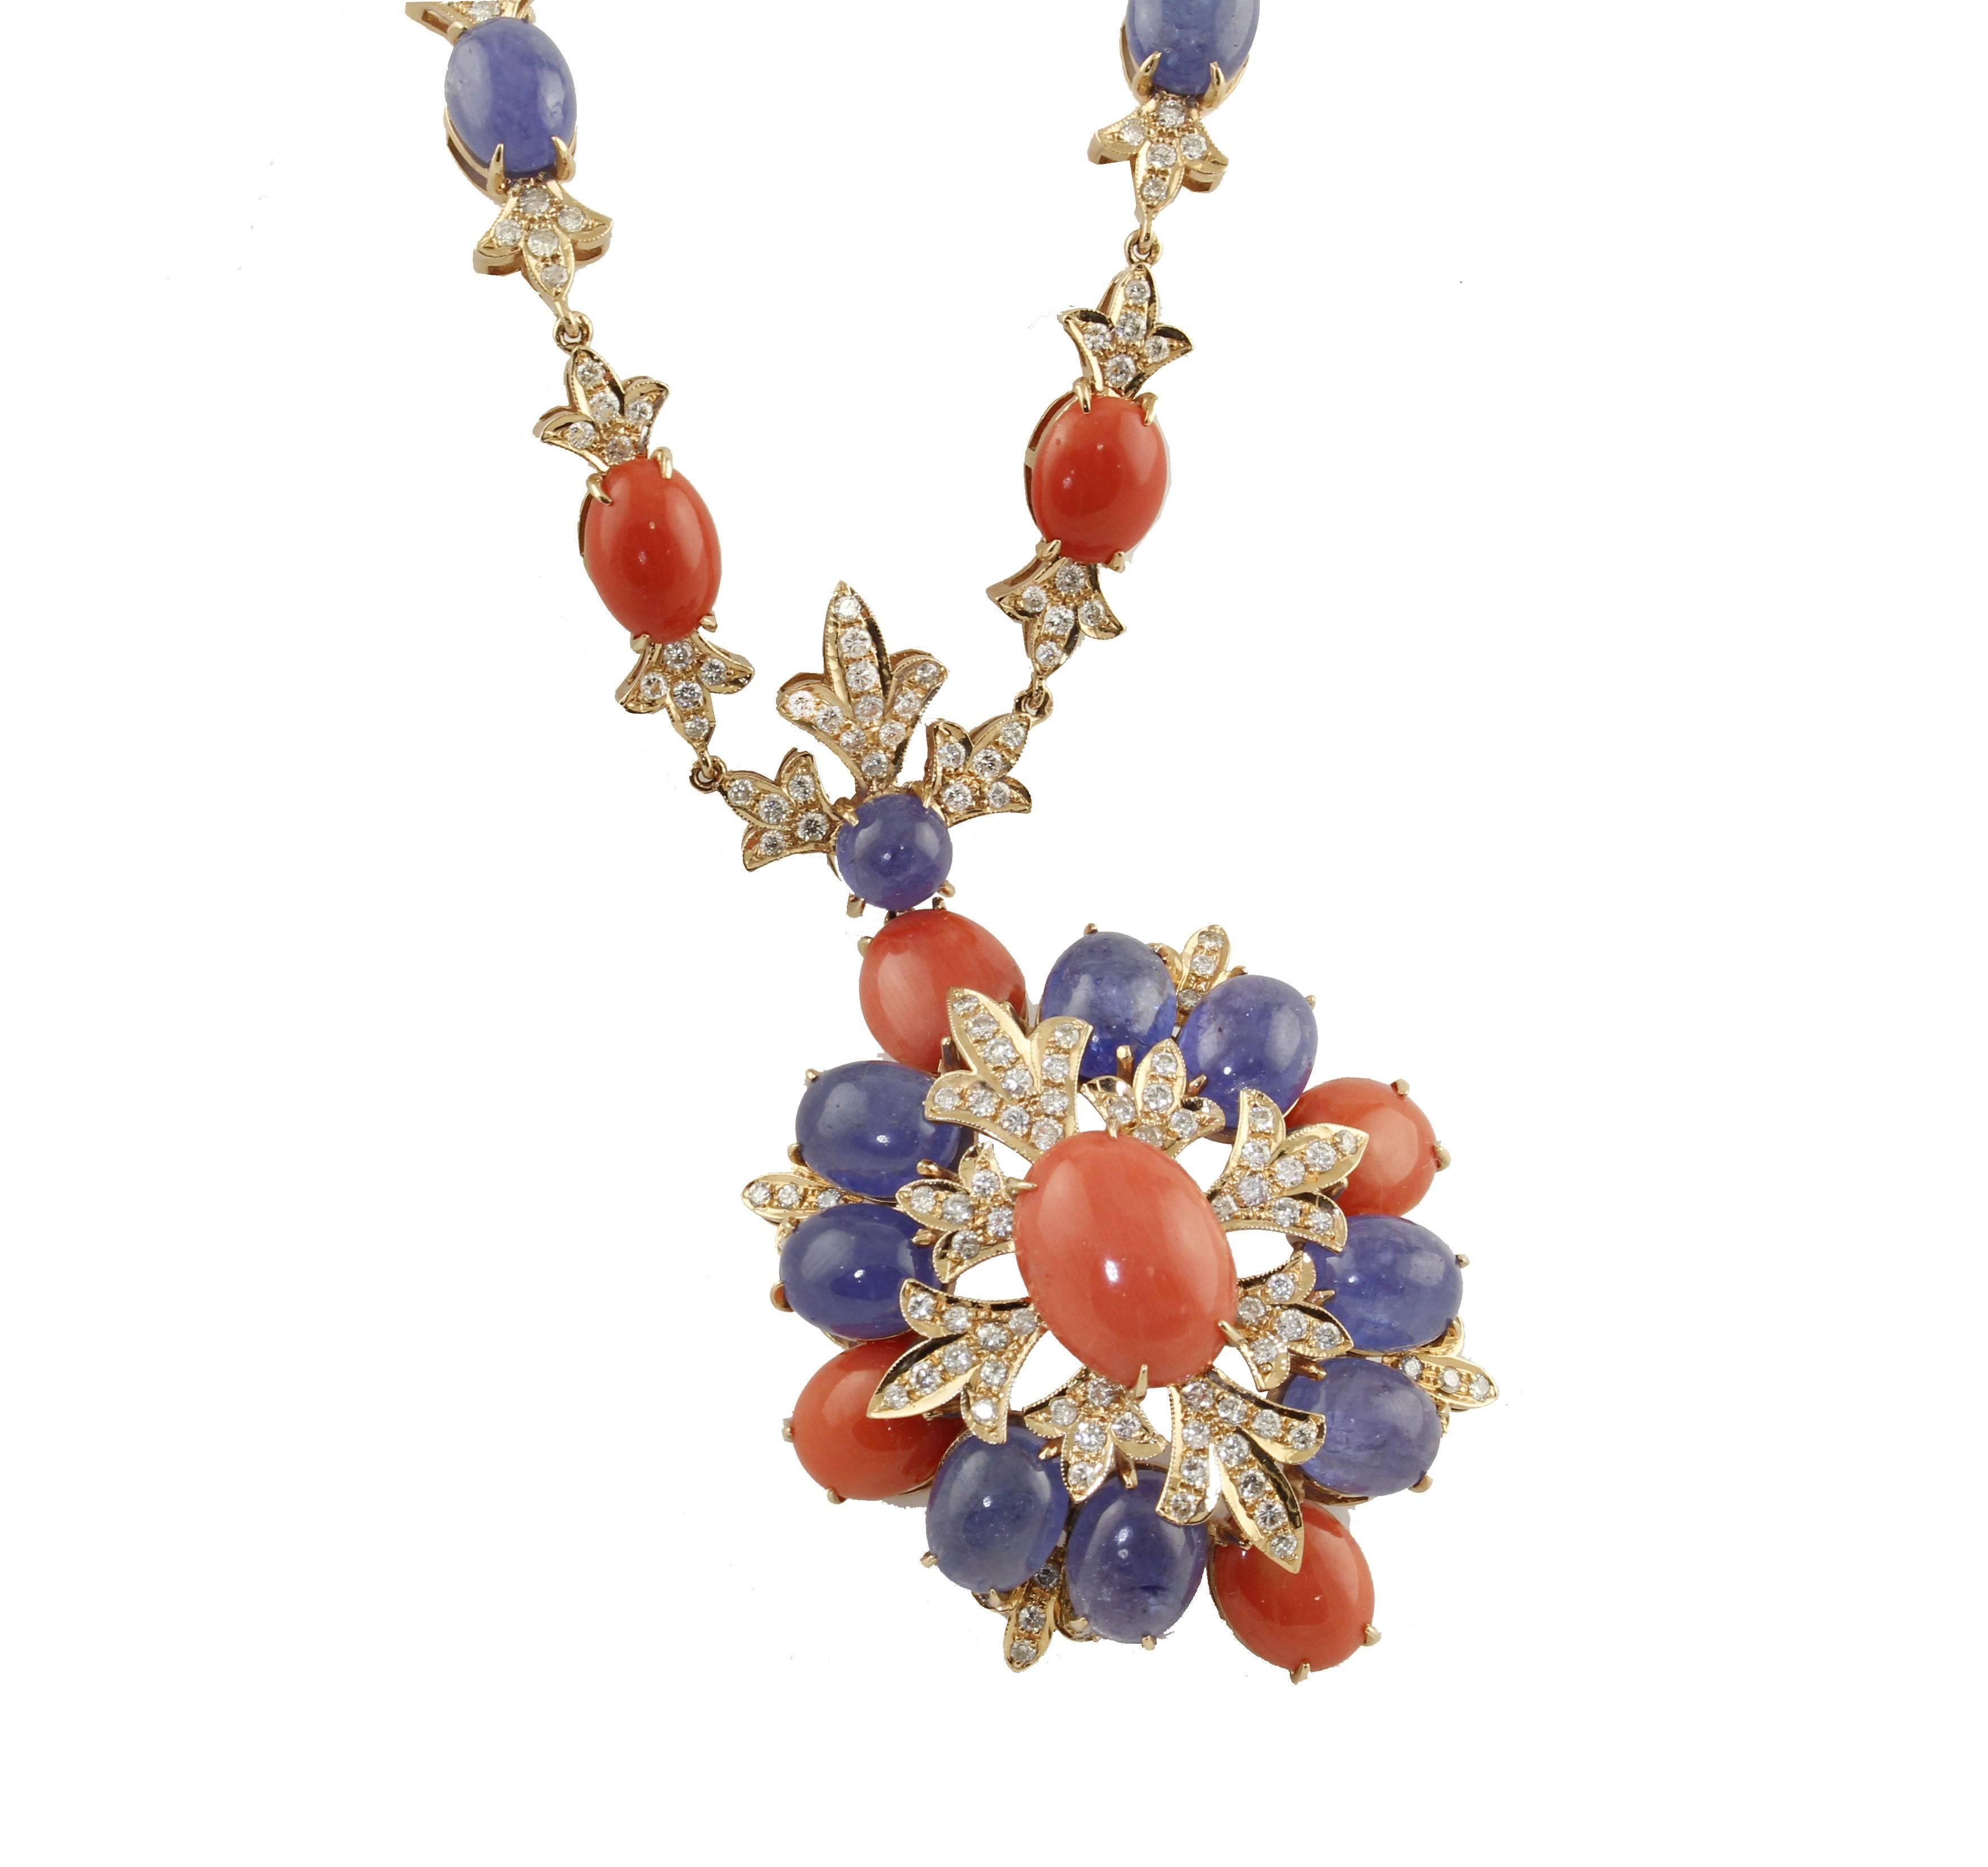 Fabulous 14 kt rose gold necklace, all encrusted with 8.70 g coral, alternating with 48.71 ct tanzanite and 6.42 ct diamonds.
Diamonds ct 6.42
Coral  8.70 g 
Tanzanite 48.71 ct
Total weight g 70.70
R.F + uoafo

For any enquires, please contact the